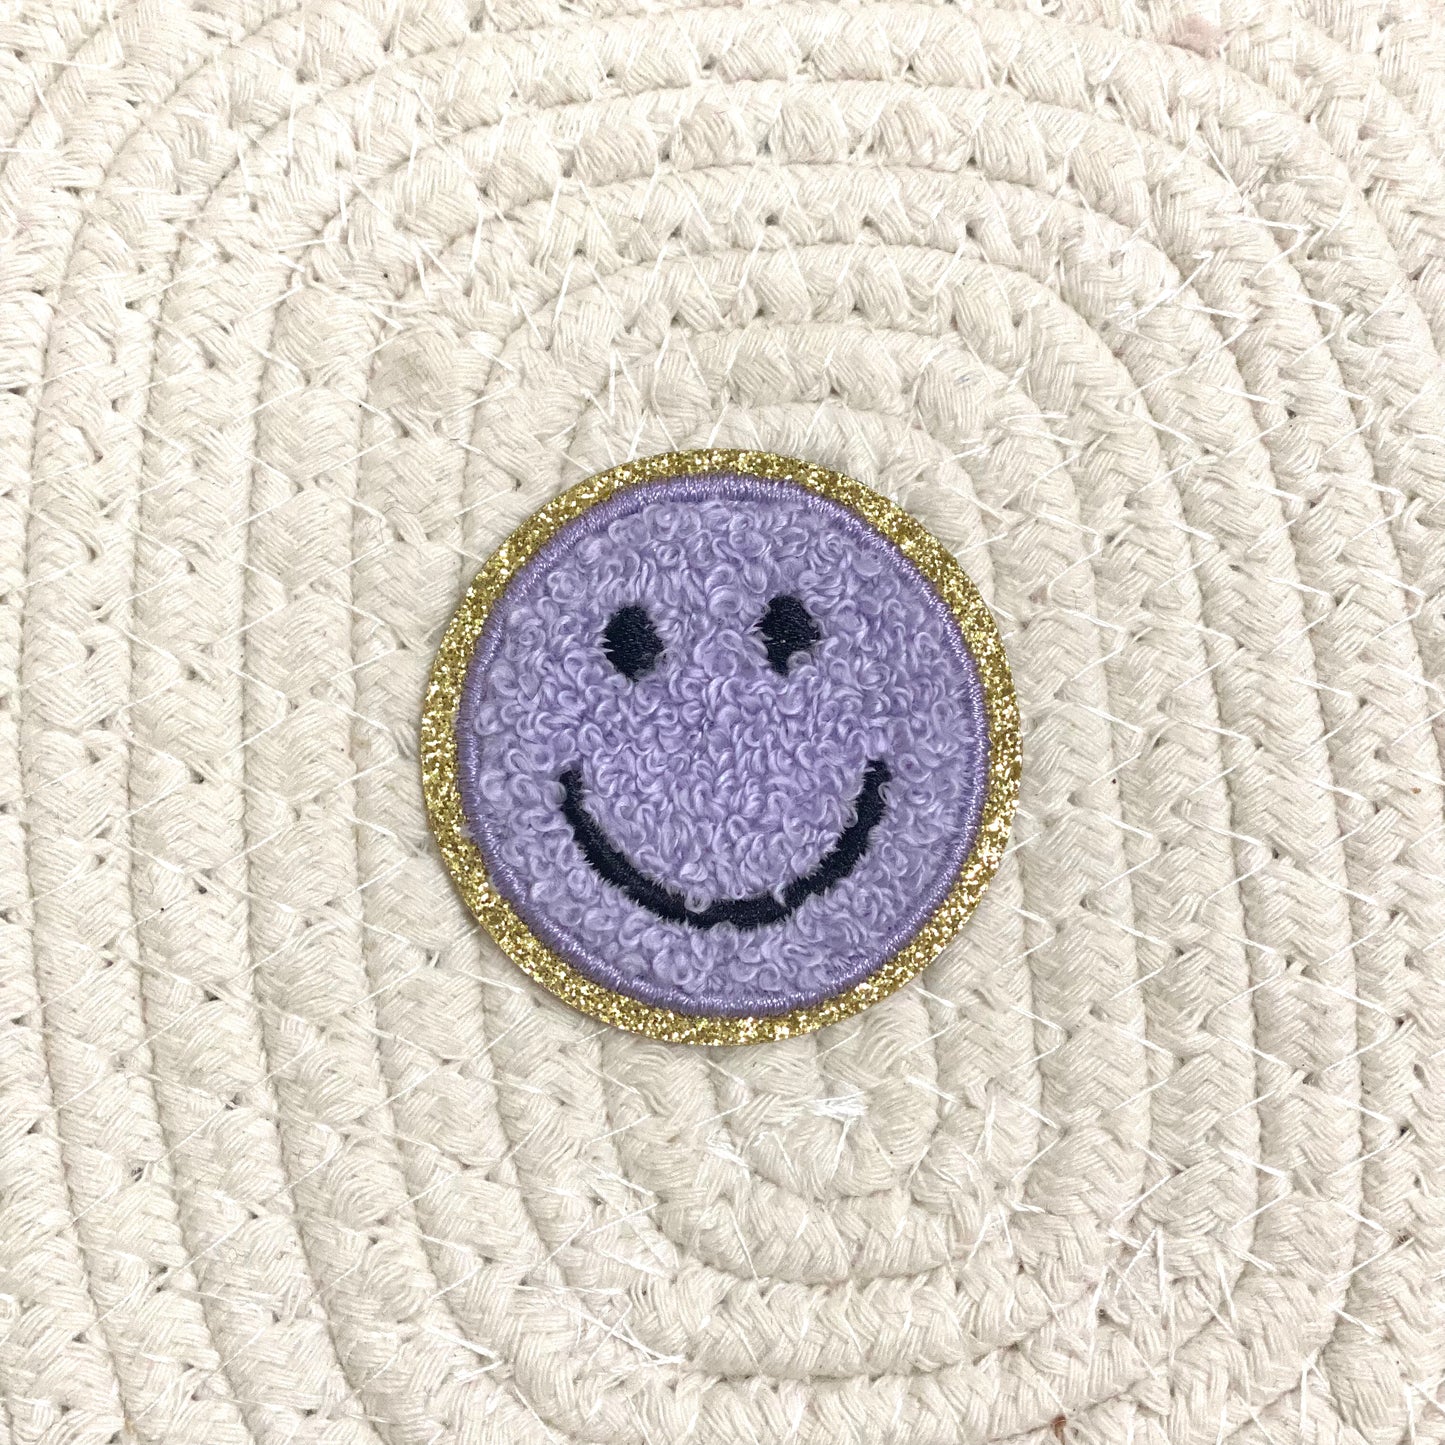 Smiley Iron On Patch PURPLE